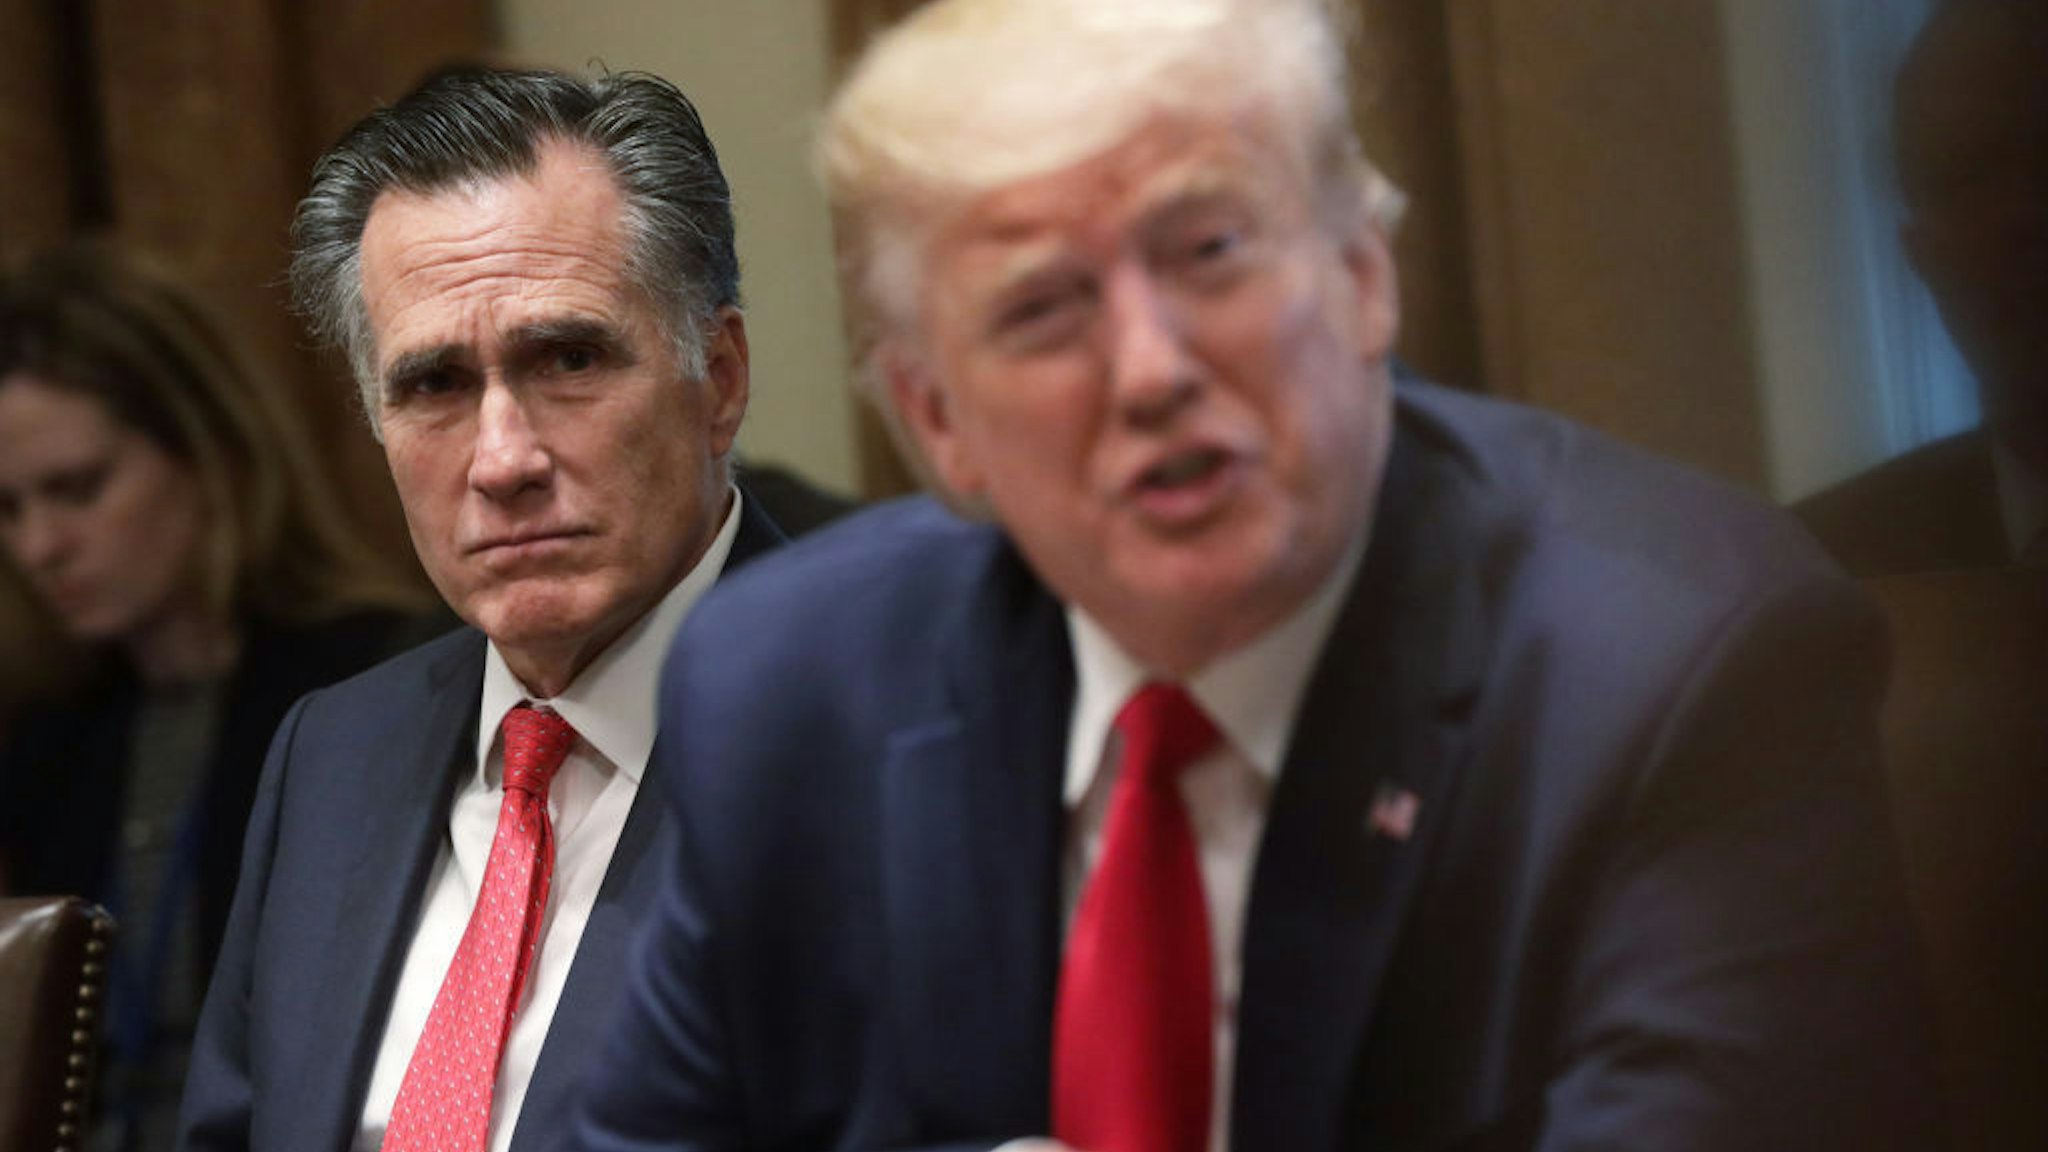 U.S. Sen. Mitt Romney (R-UT) listens as President Donald Trump speaks during a listening session on youth vaping of electronic cigarette on November 22, 2019 in the Cabinet Room of the White House in Washington, DC. President Trump met with business and concern group leaders to discuss on how to regulate vaping products and keep youth away from them. (Photo by Alex Wong/Getty Images)